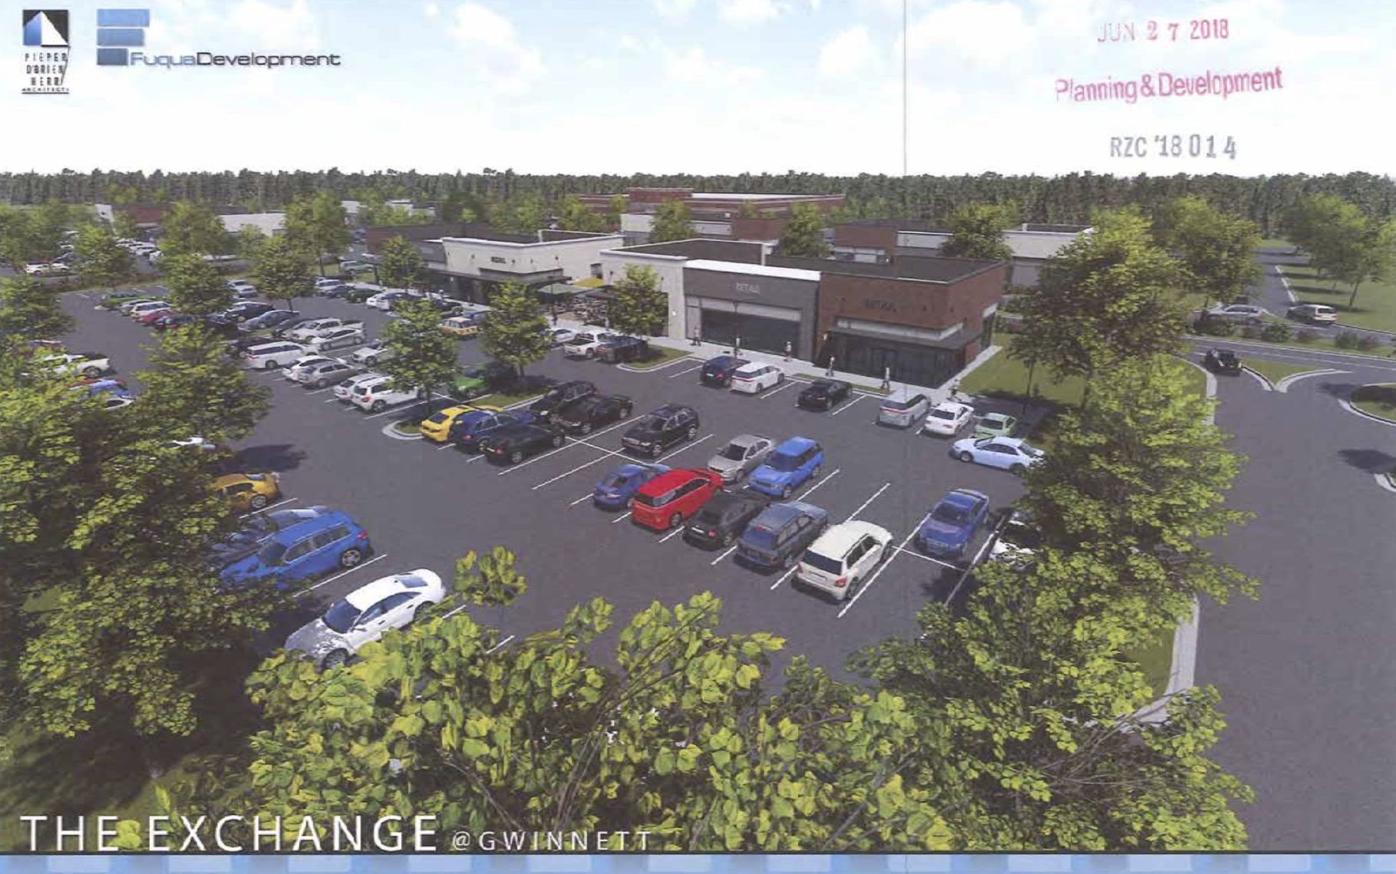 Gwinnett news: Huge mixed-use development pitched near Coolray